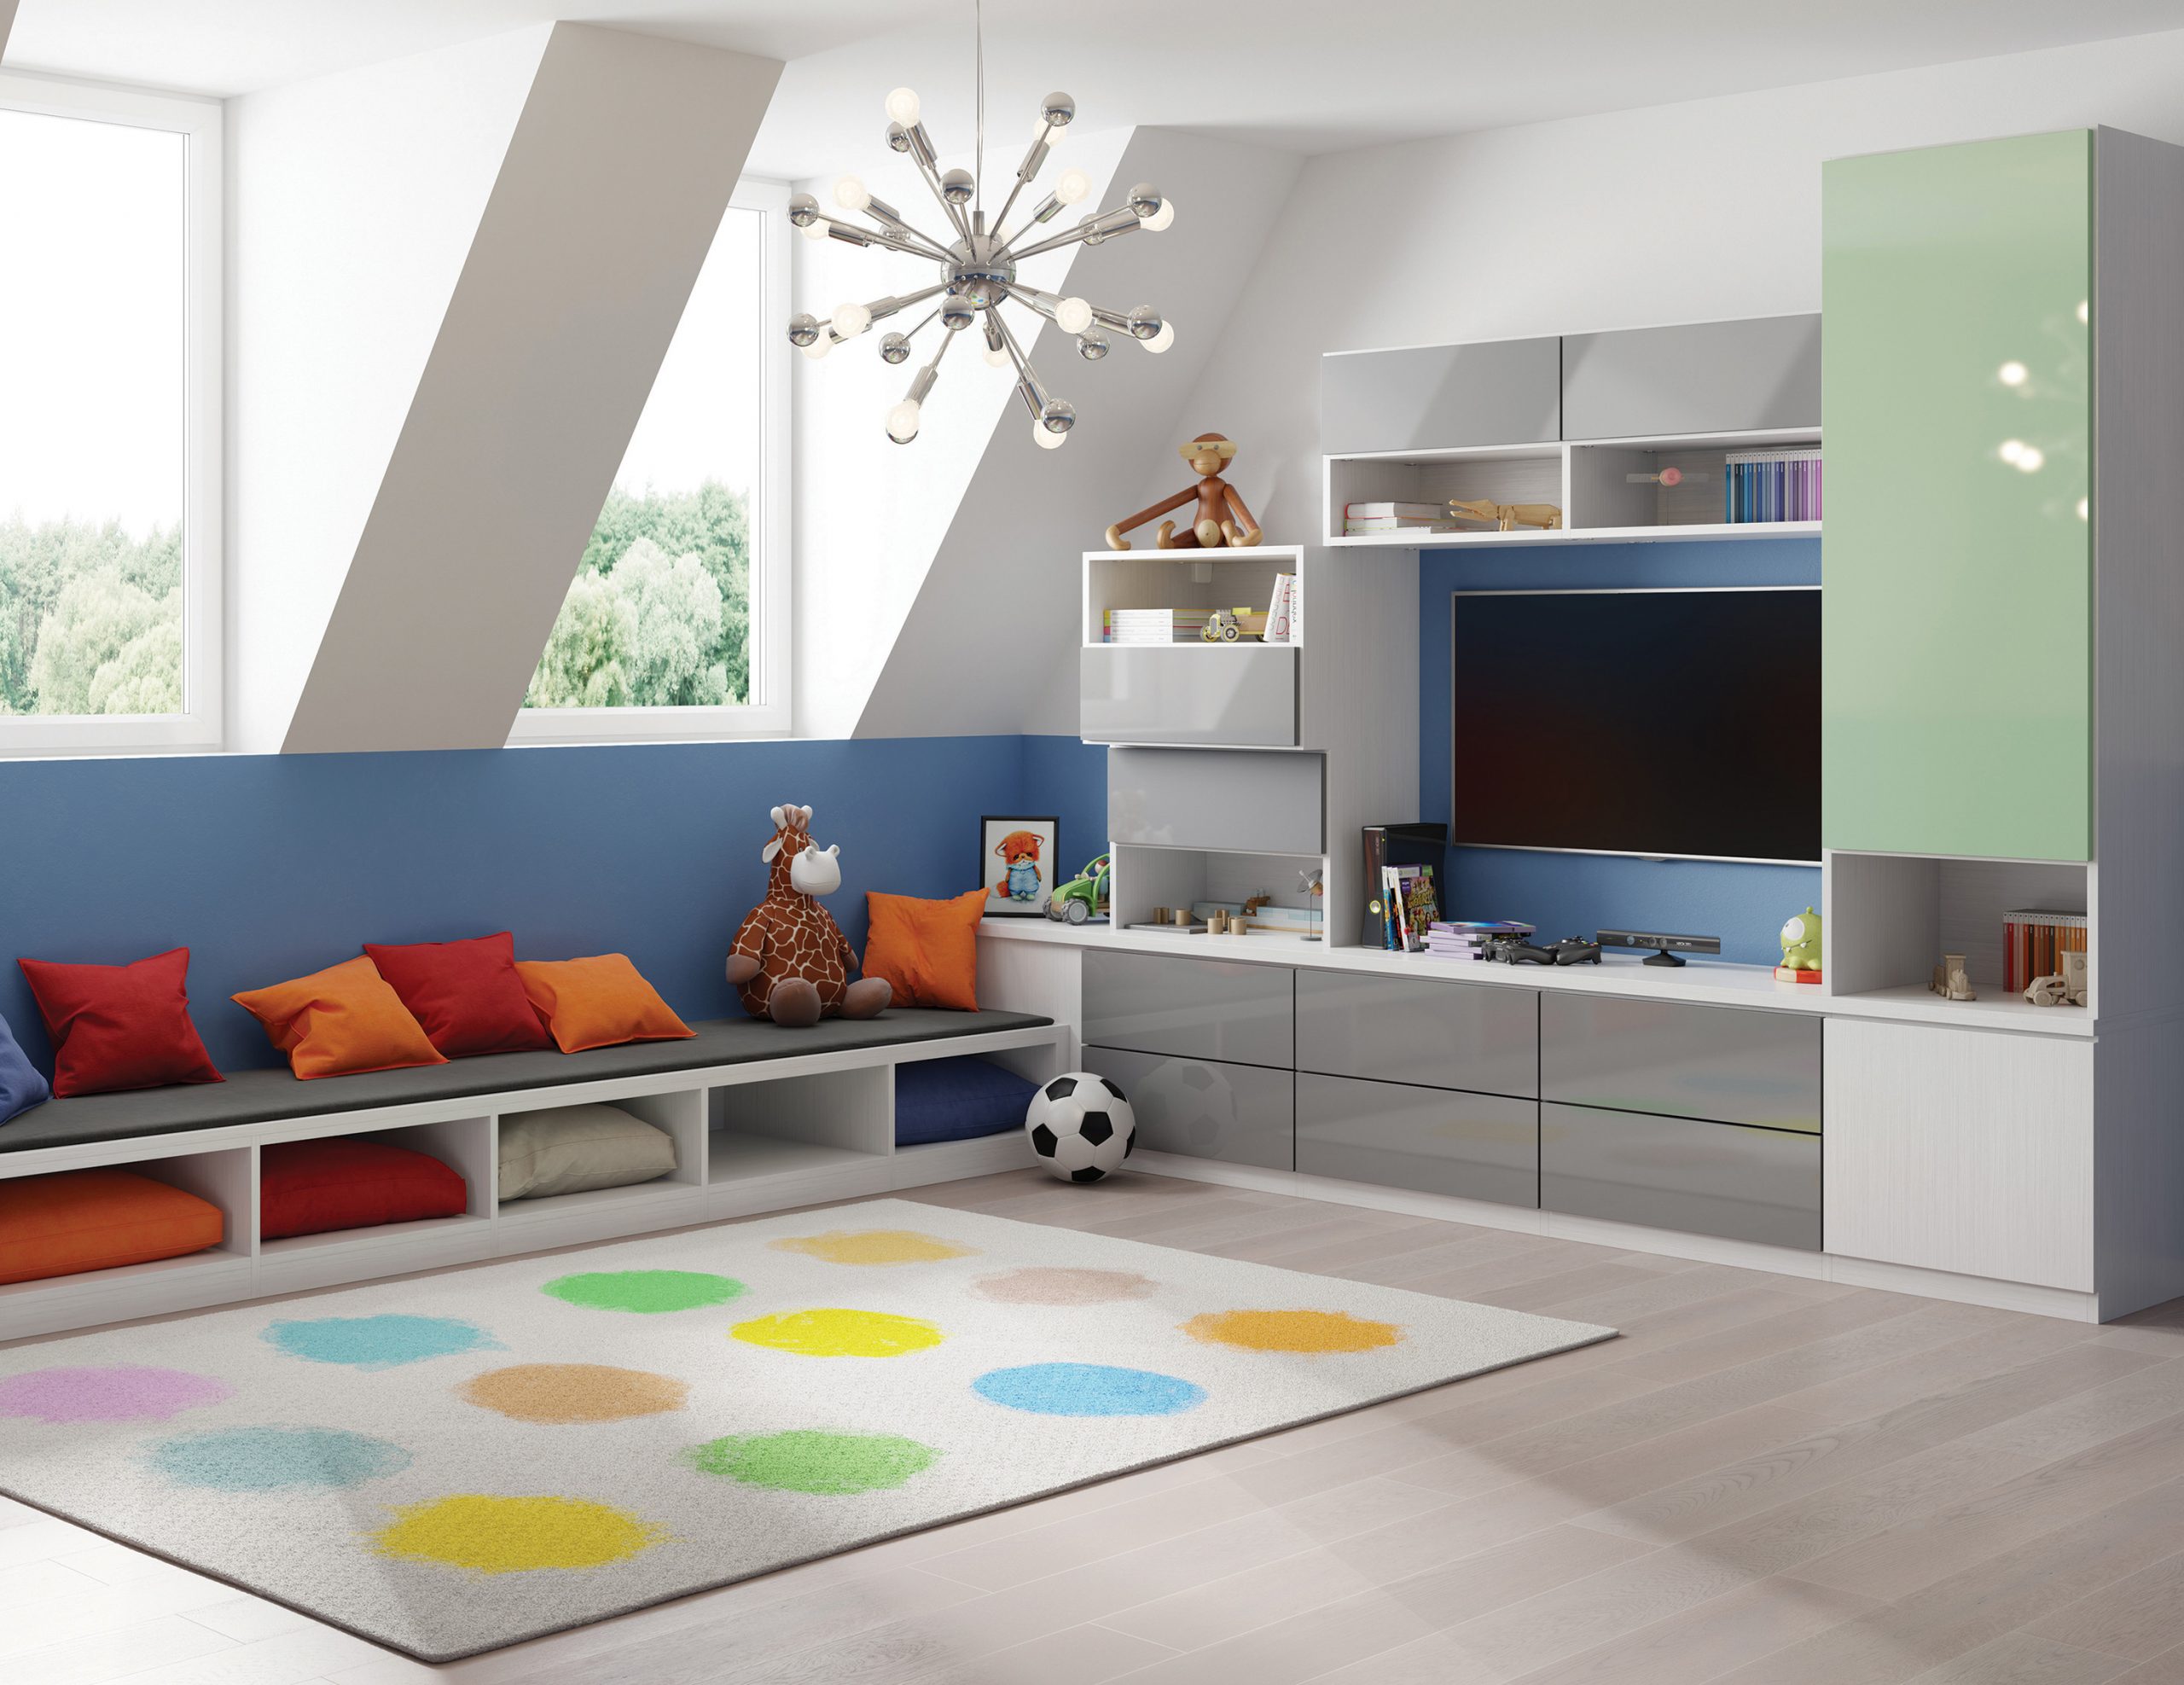 An attic living room with a stylish playroom